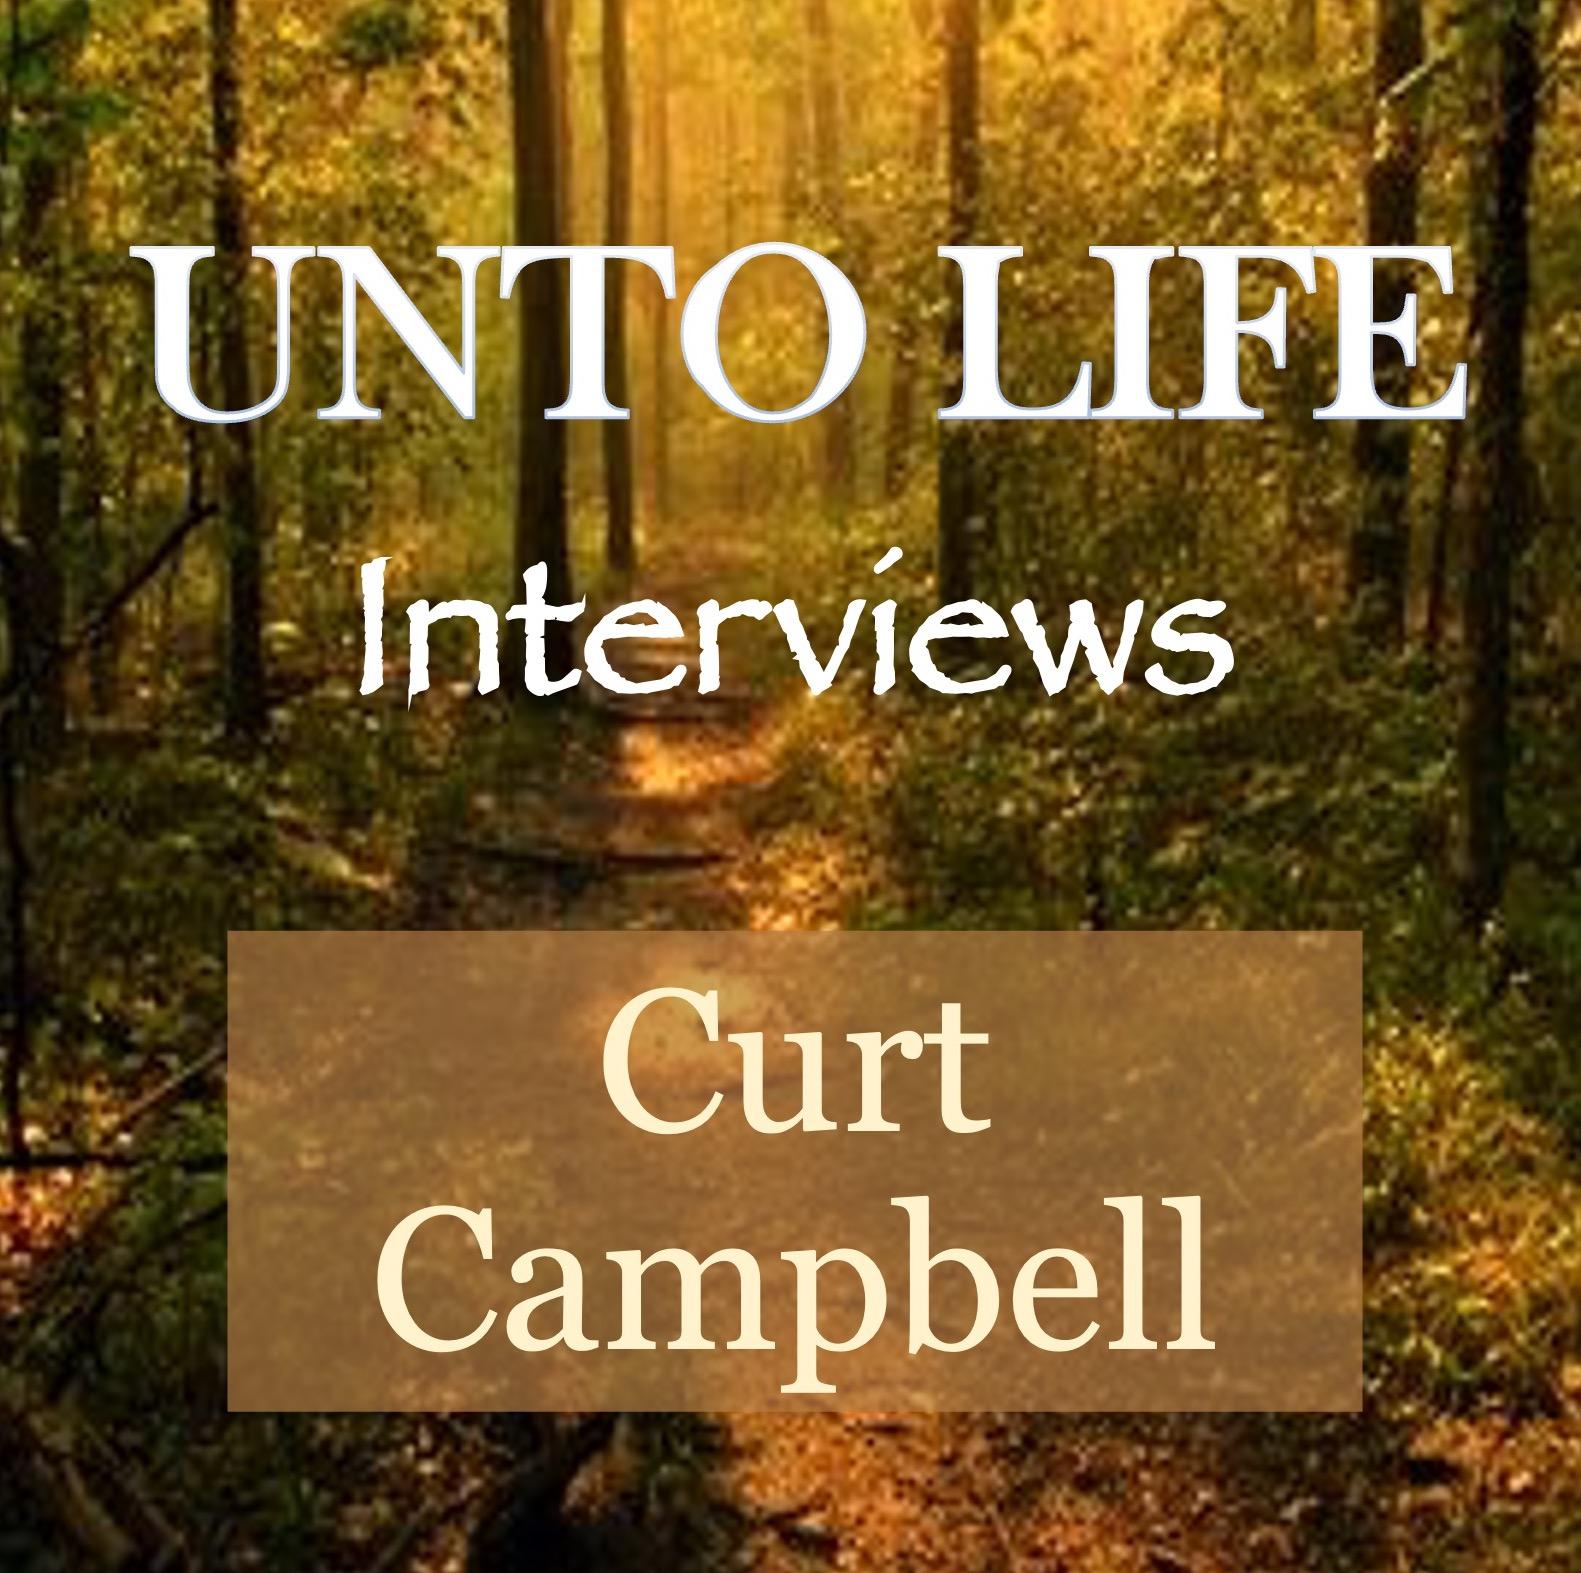 Curt Campbell and the Miracle of Transformation